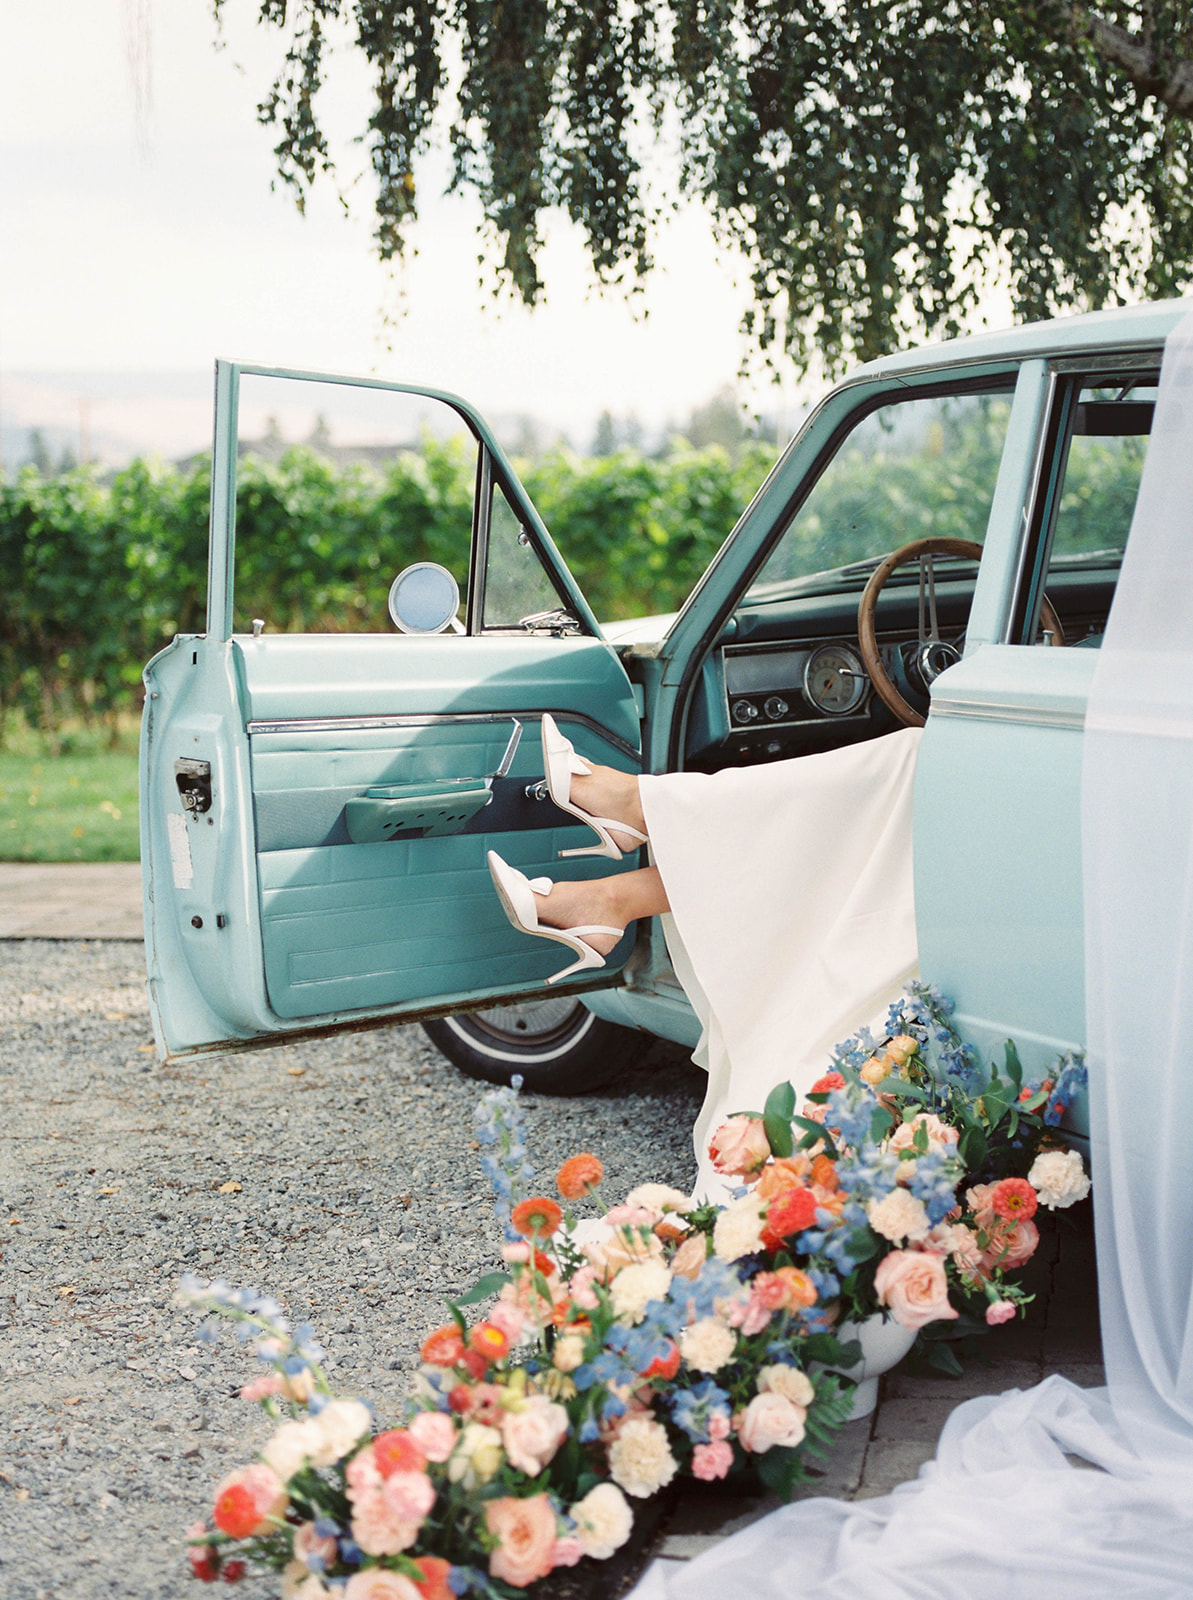 lush floral arrangements adorning a classic car, transforming it into a stunning centrepiece for a vintage-inspired wedding, bride wearing white satin bridal heels by Bella Belle Shoes kicks her feet up in a vintage baby blue car, unique bridal portrait inspiration